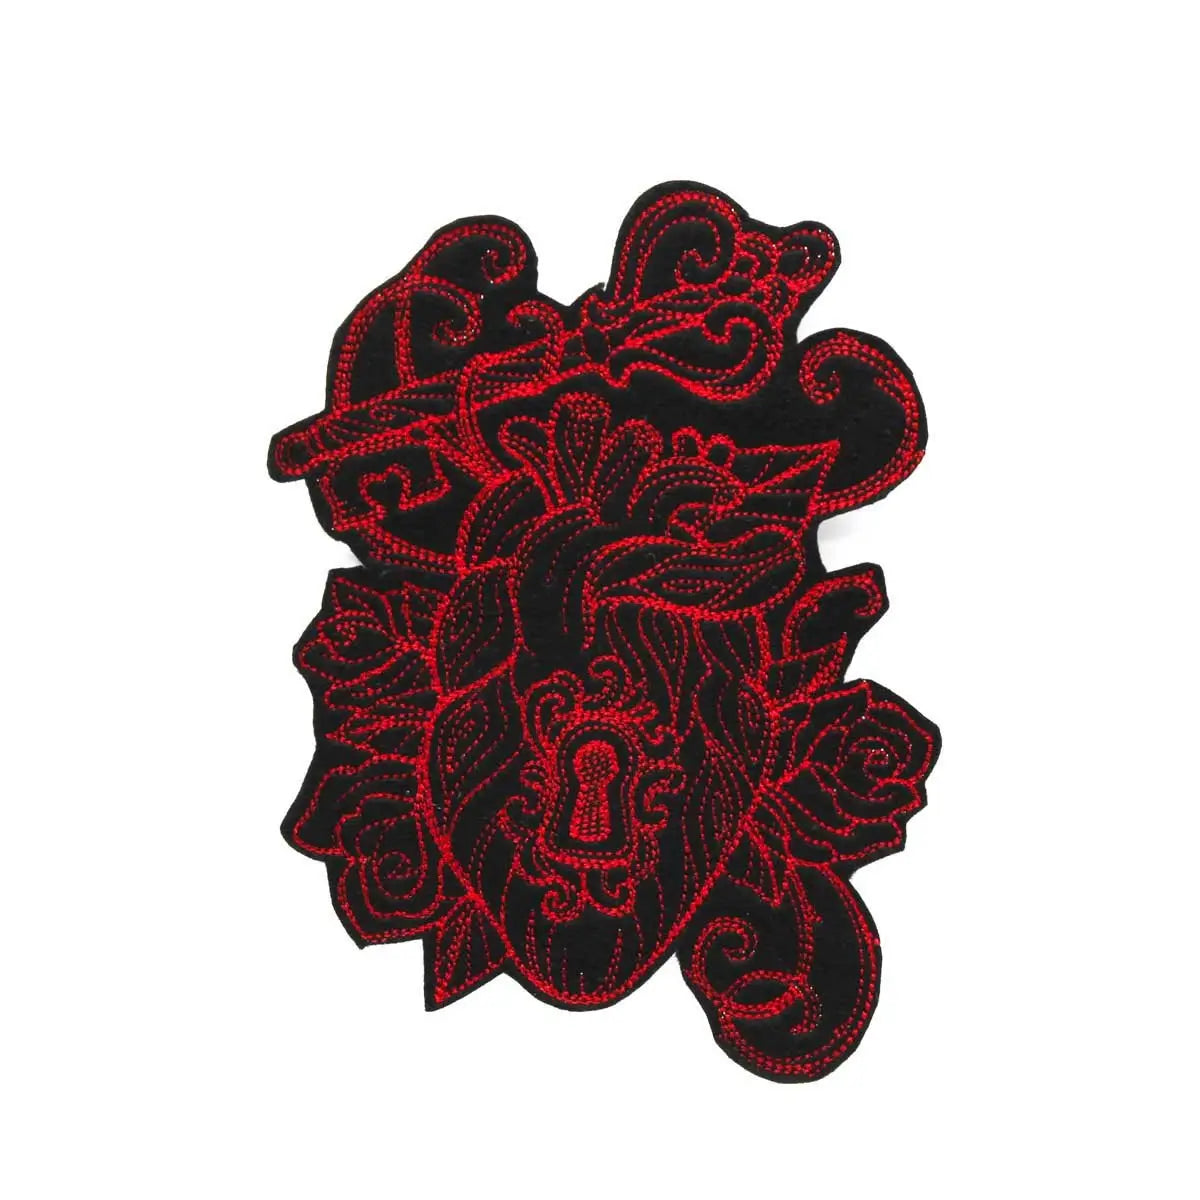 A large embroidered patch of an anatomical style heart with a keyhole in the middle flanked by an antique style key. It is embroidered in red on a black backgrounc